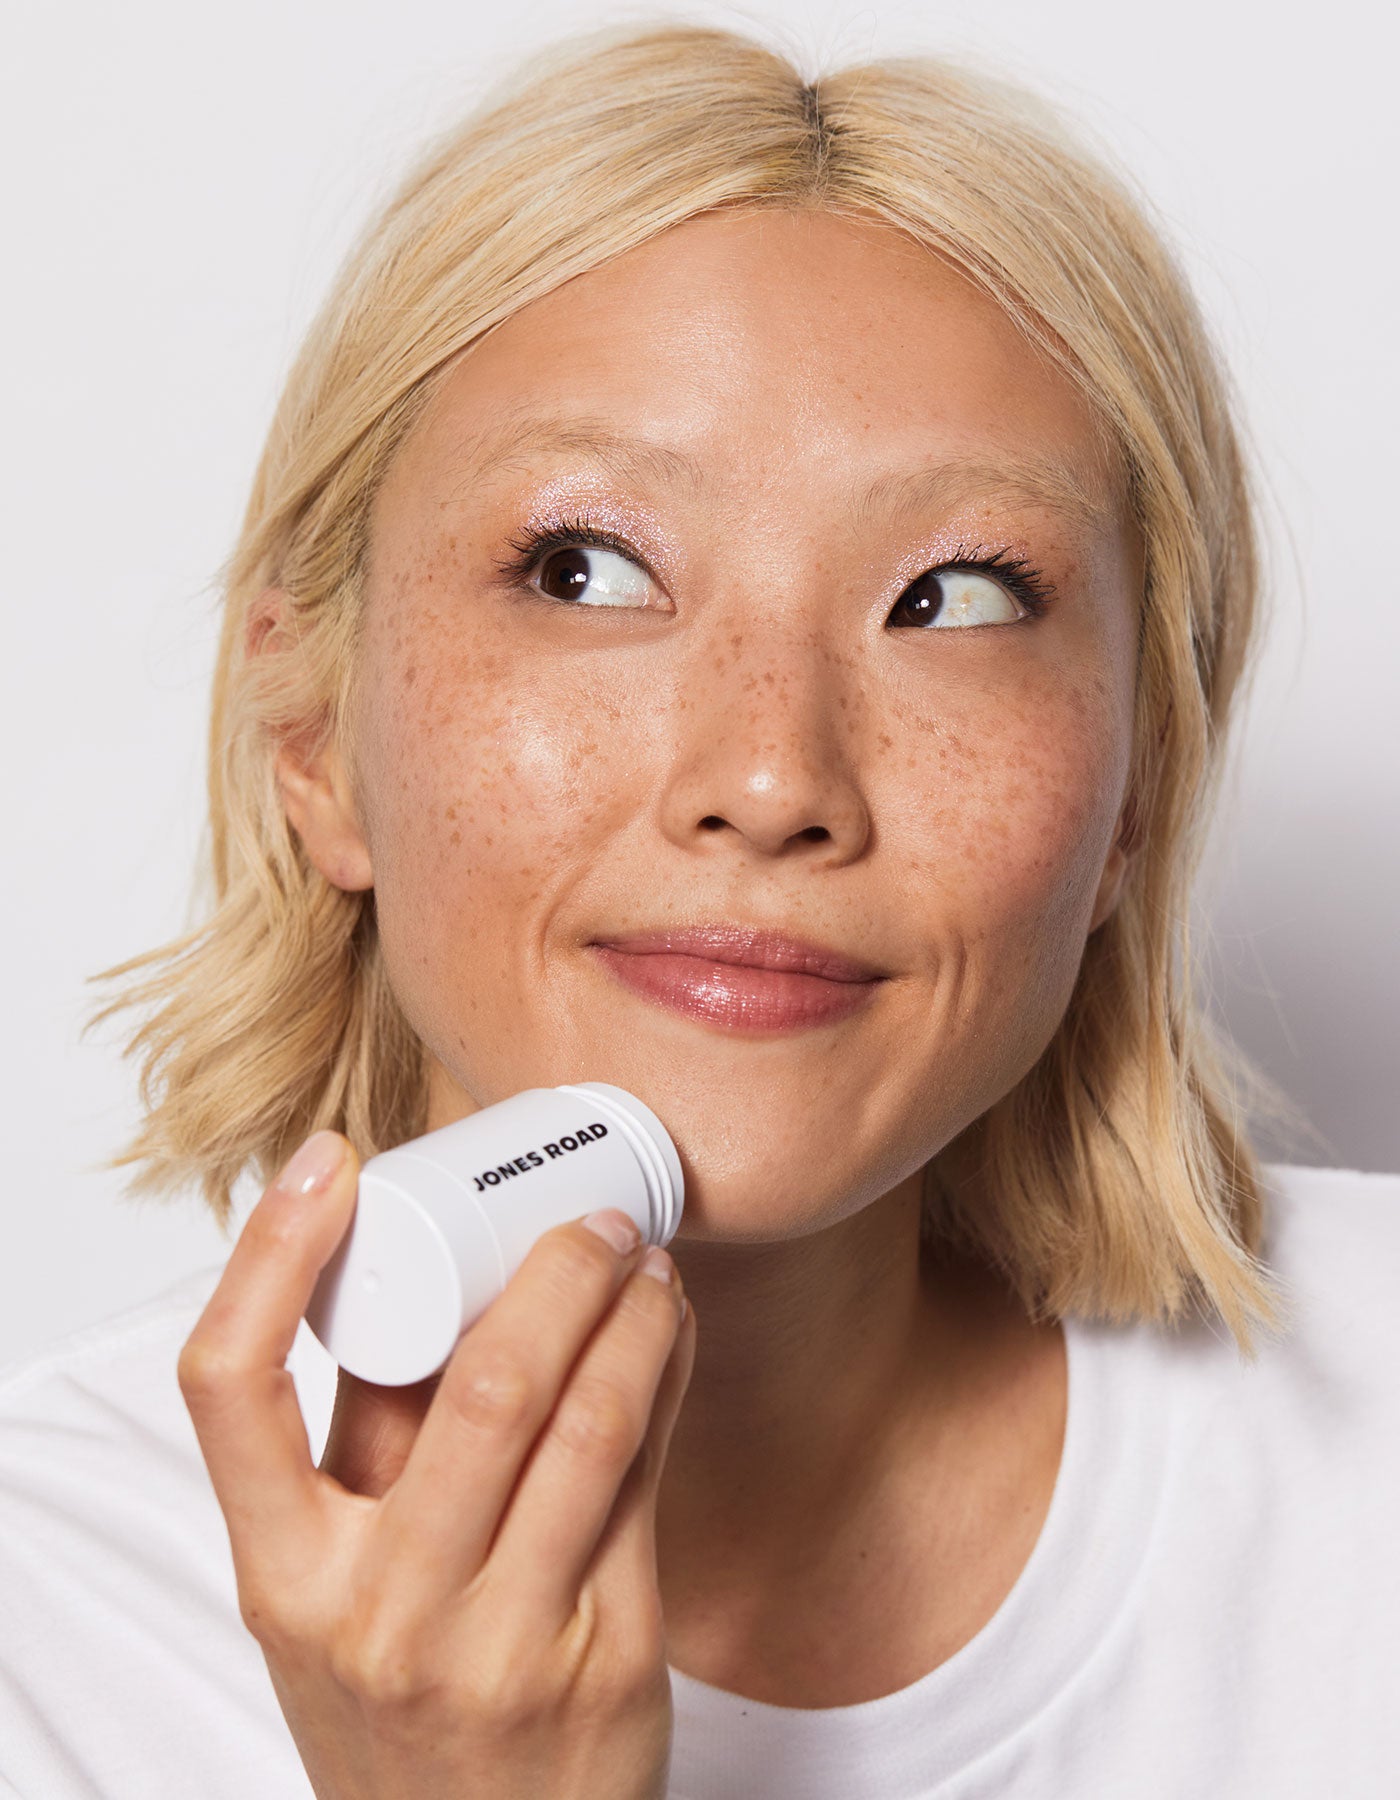 Jones Road Beauty model with the cleansing stick